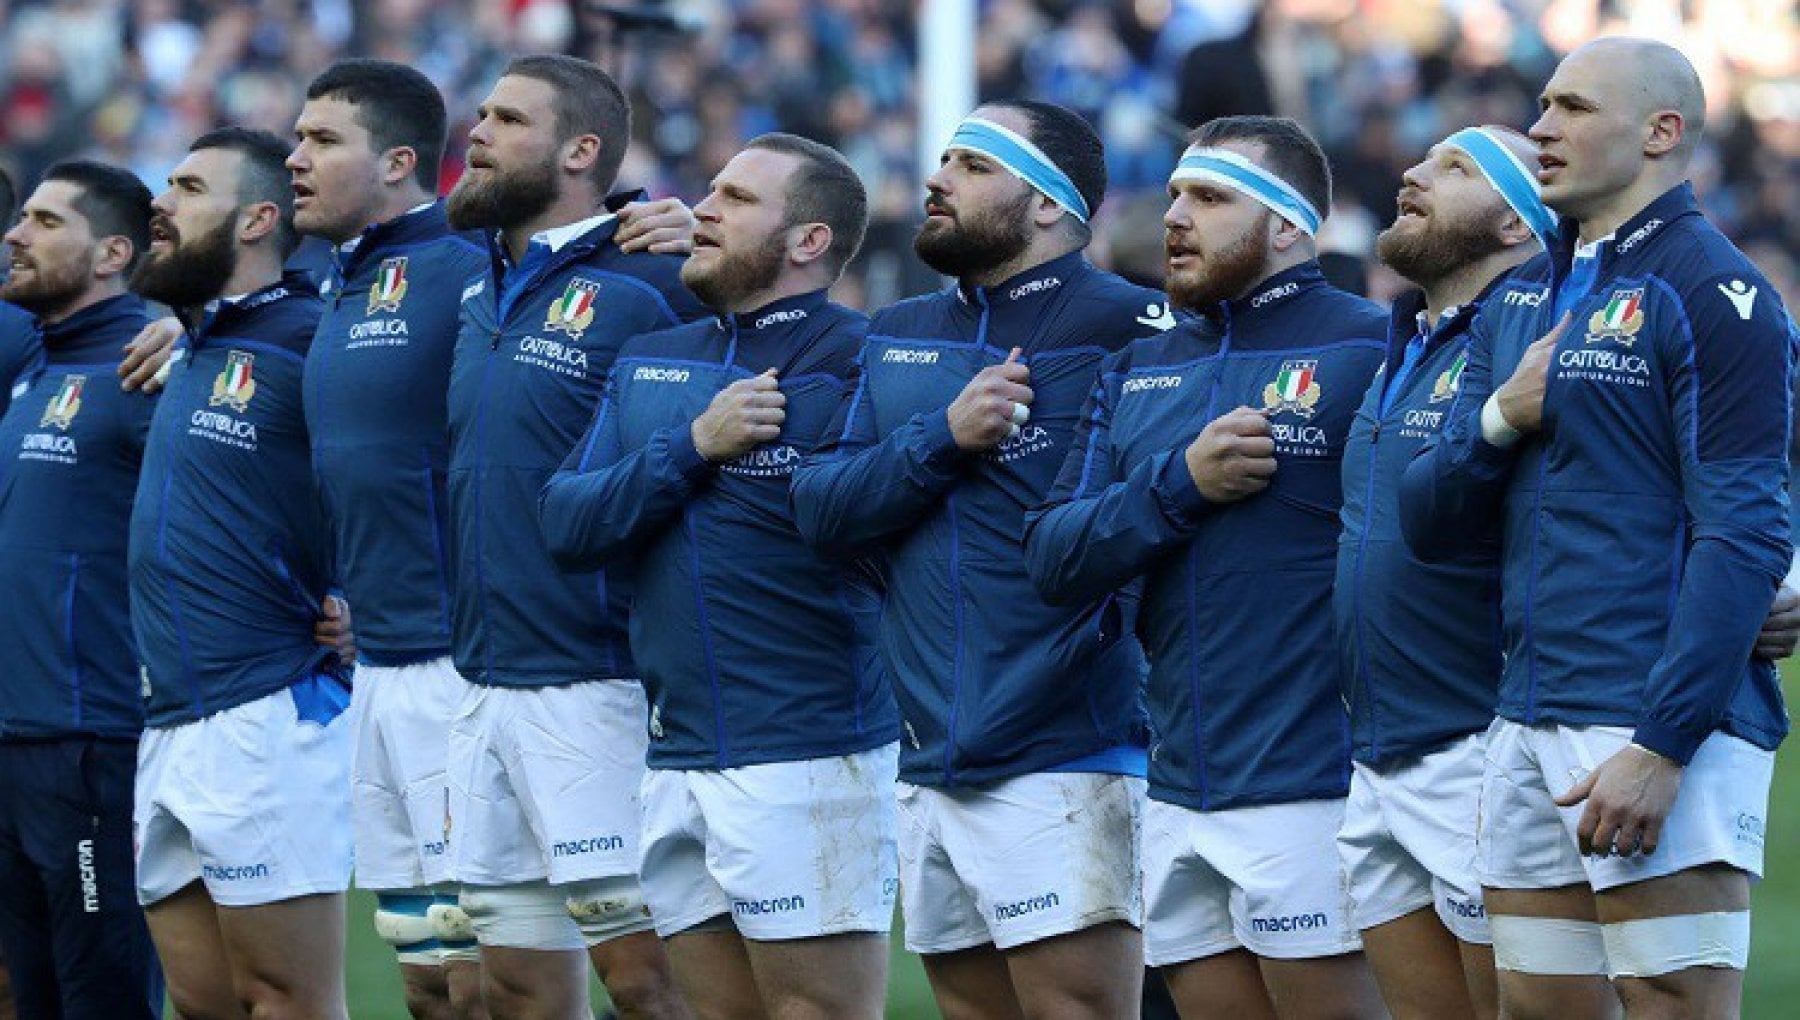   Rugby, Six Nations return;  In Italy and Ireland, the news is Garbici

